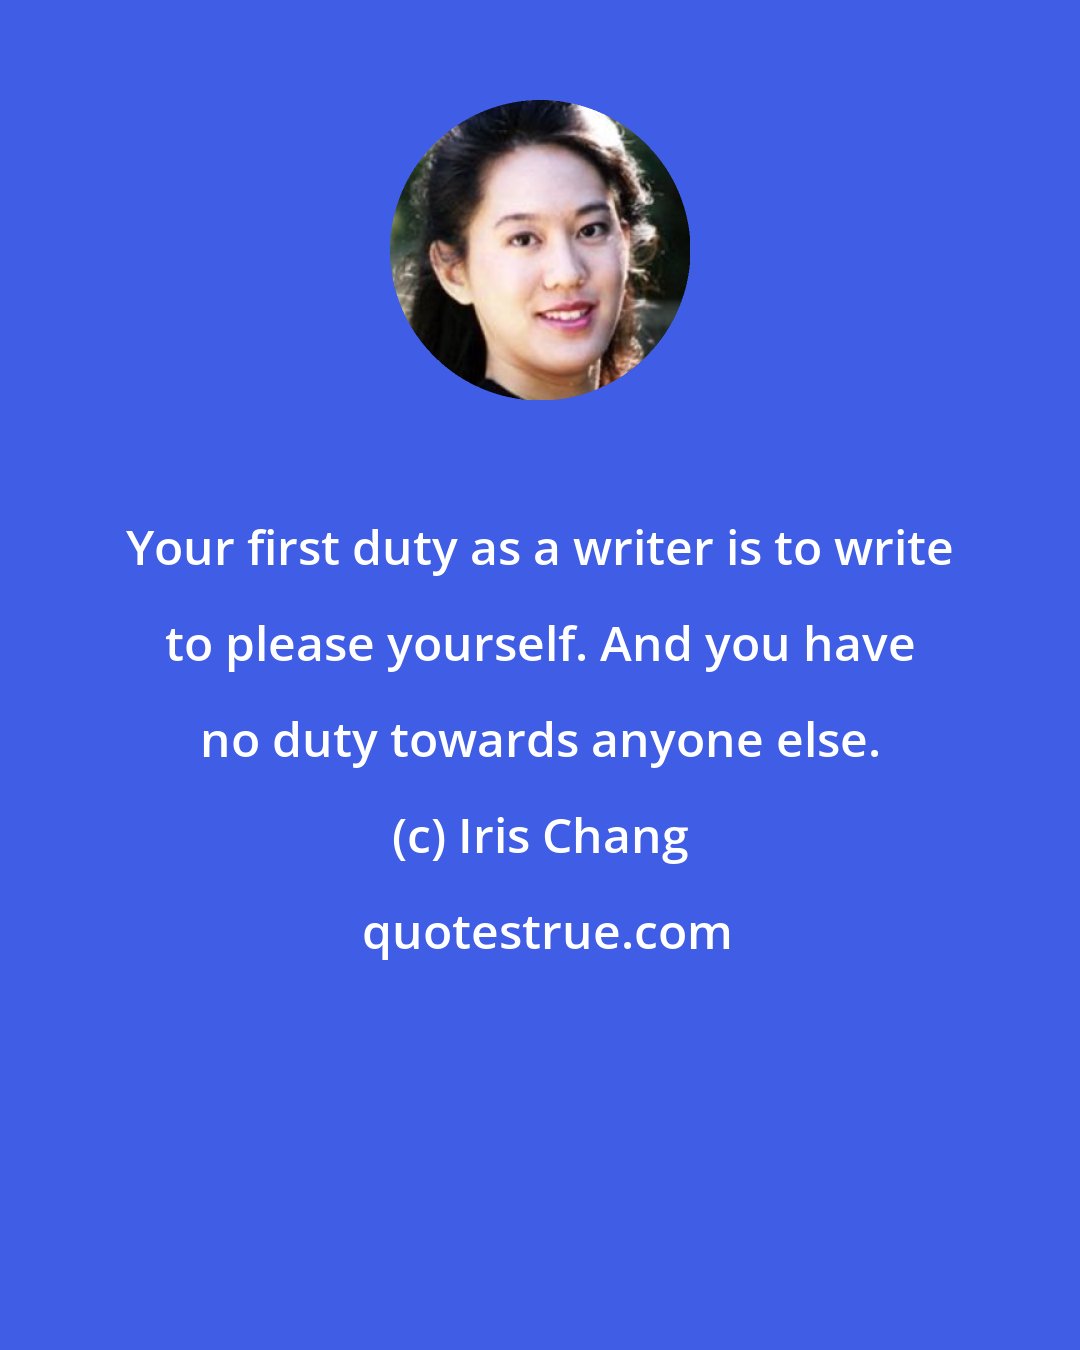 Iris Chang: Your first duty as a writer is to write to please yourself. And you have no duty towards anyone else.